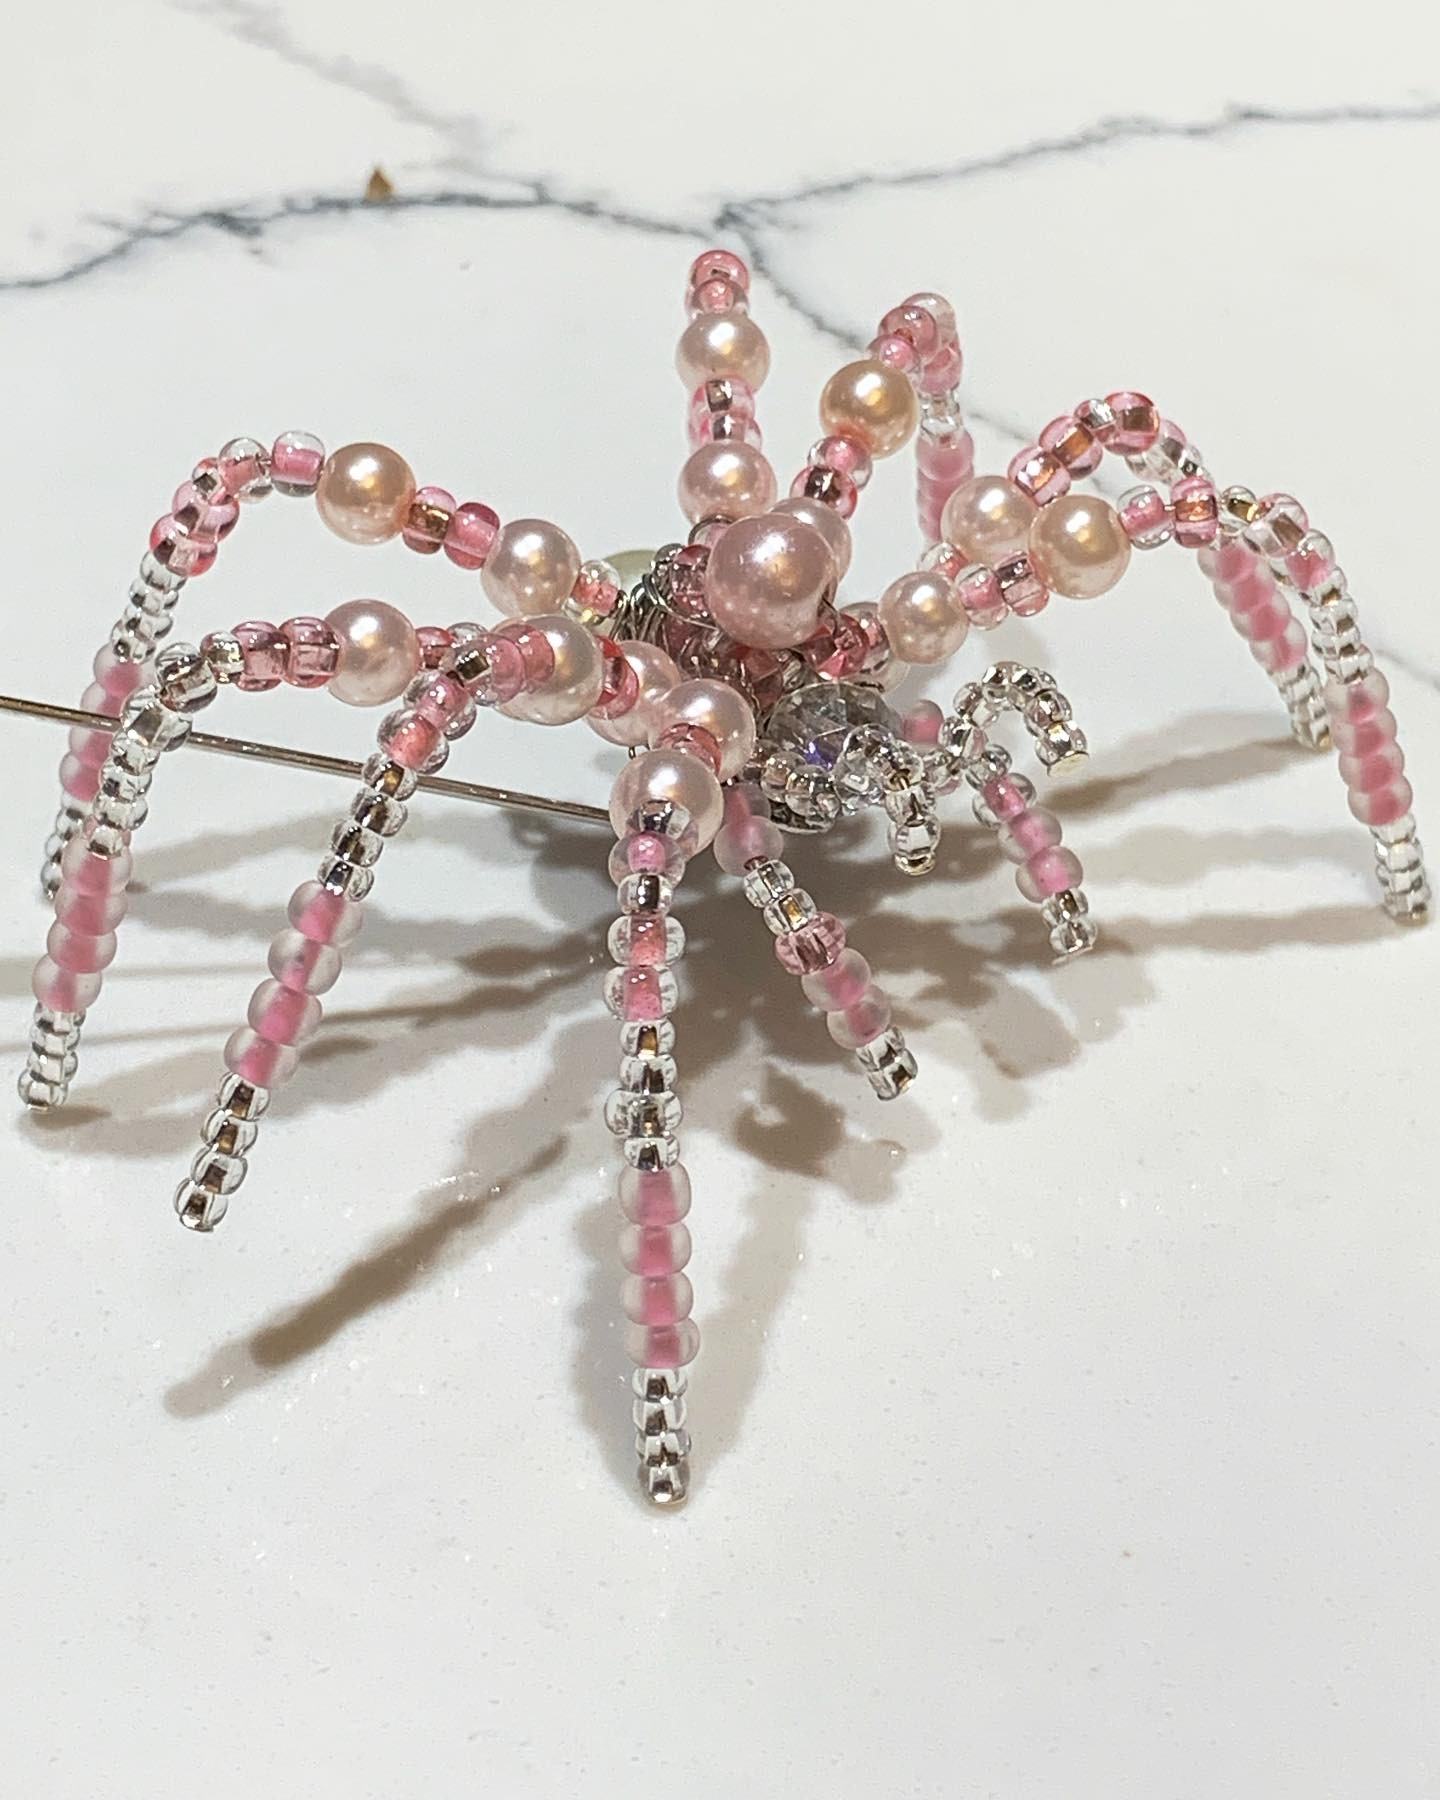 #prototypes #prototypeready #pinkcrystal #pinkspider #spiderbroach #beadandcrystals #crystalsandpearls #beadworkjewelry it just #sparkles so much it’s hard to capture it in the right light, I’ll be using the light box when I get to producing these when all my supplies arrive and I get rolling in colour and stereo! Super excited to be doing this! PM me for details if your interested! #jewellerymaking #christmasspider #easterspider and beyond! #crafting from your fave #greeneyed #dirtyblonde #glamazon #transsexualwoman #lovinglife💞 and #livingitlarge #amazonstyle 💕🖤💕